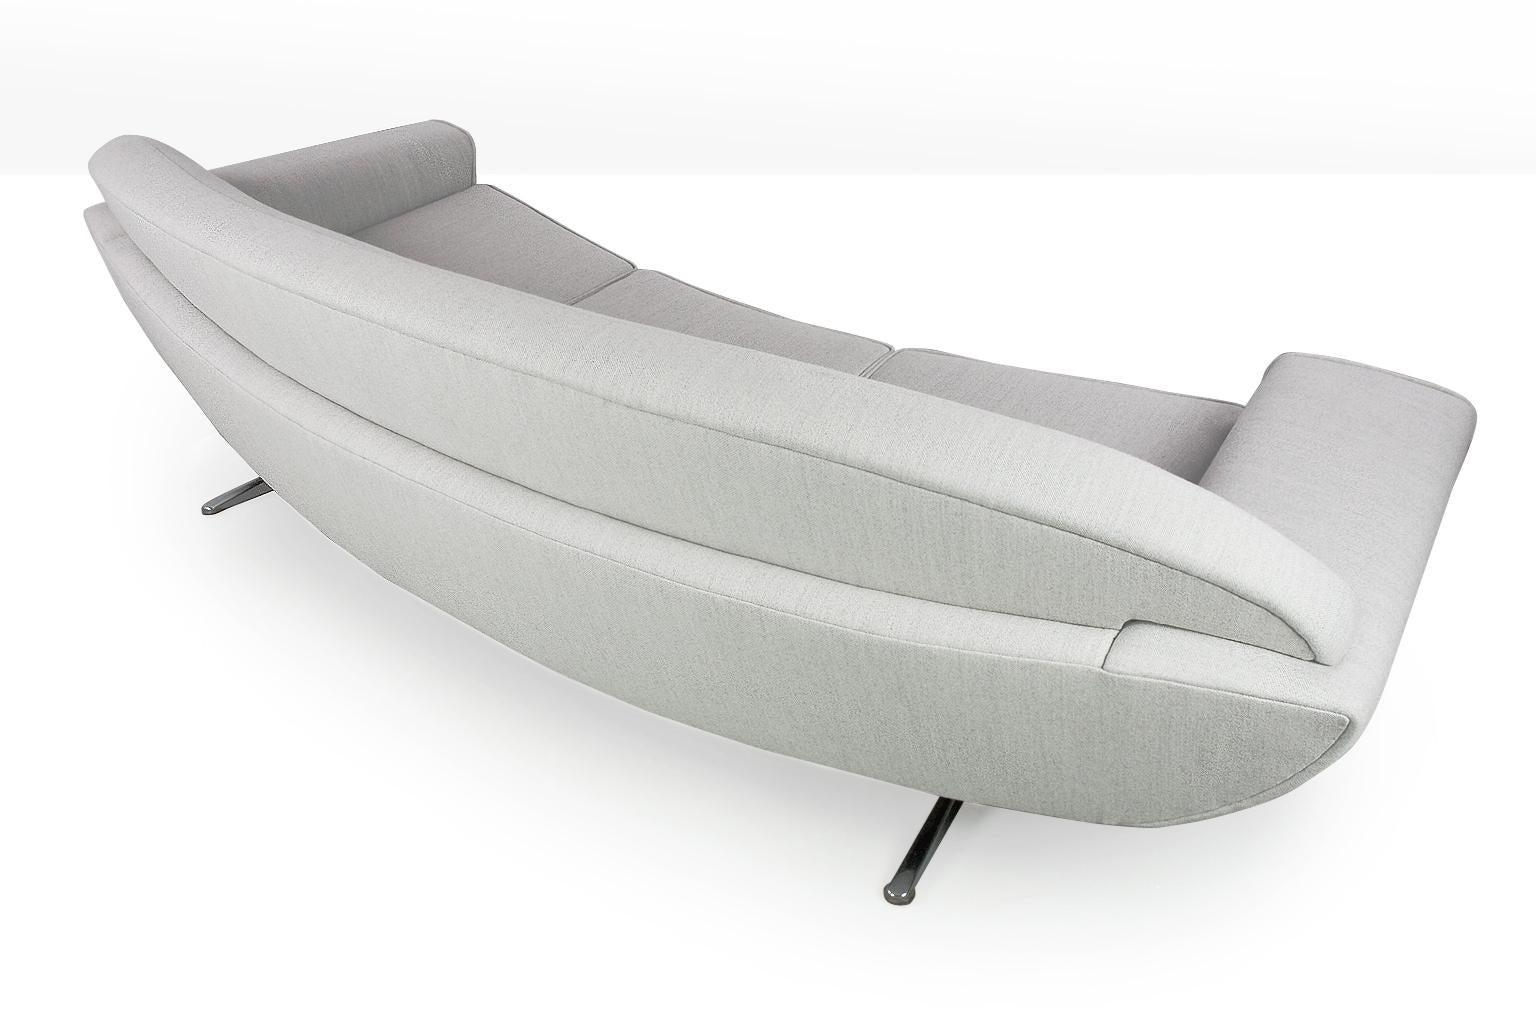 Beautiful boomerang shaped new upholstered 'Capri' sofa on a chromed t-legged frame, designed by Johannes Andersen for Trensum of Sweden in 1958. The sofa is curved, which makes it a elegant stand-alone object in your interior. 

The seat depth is